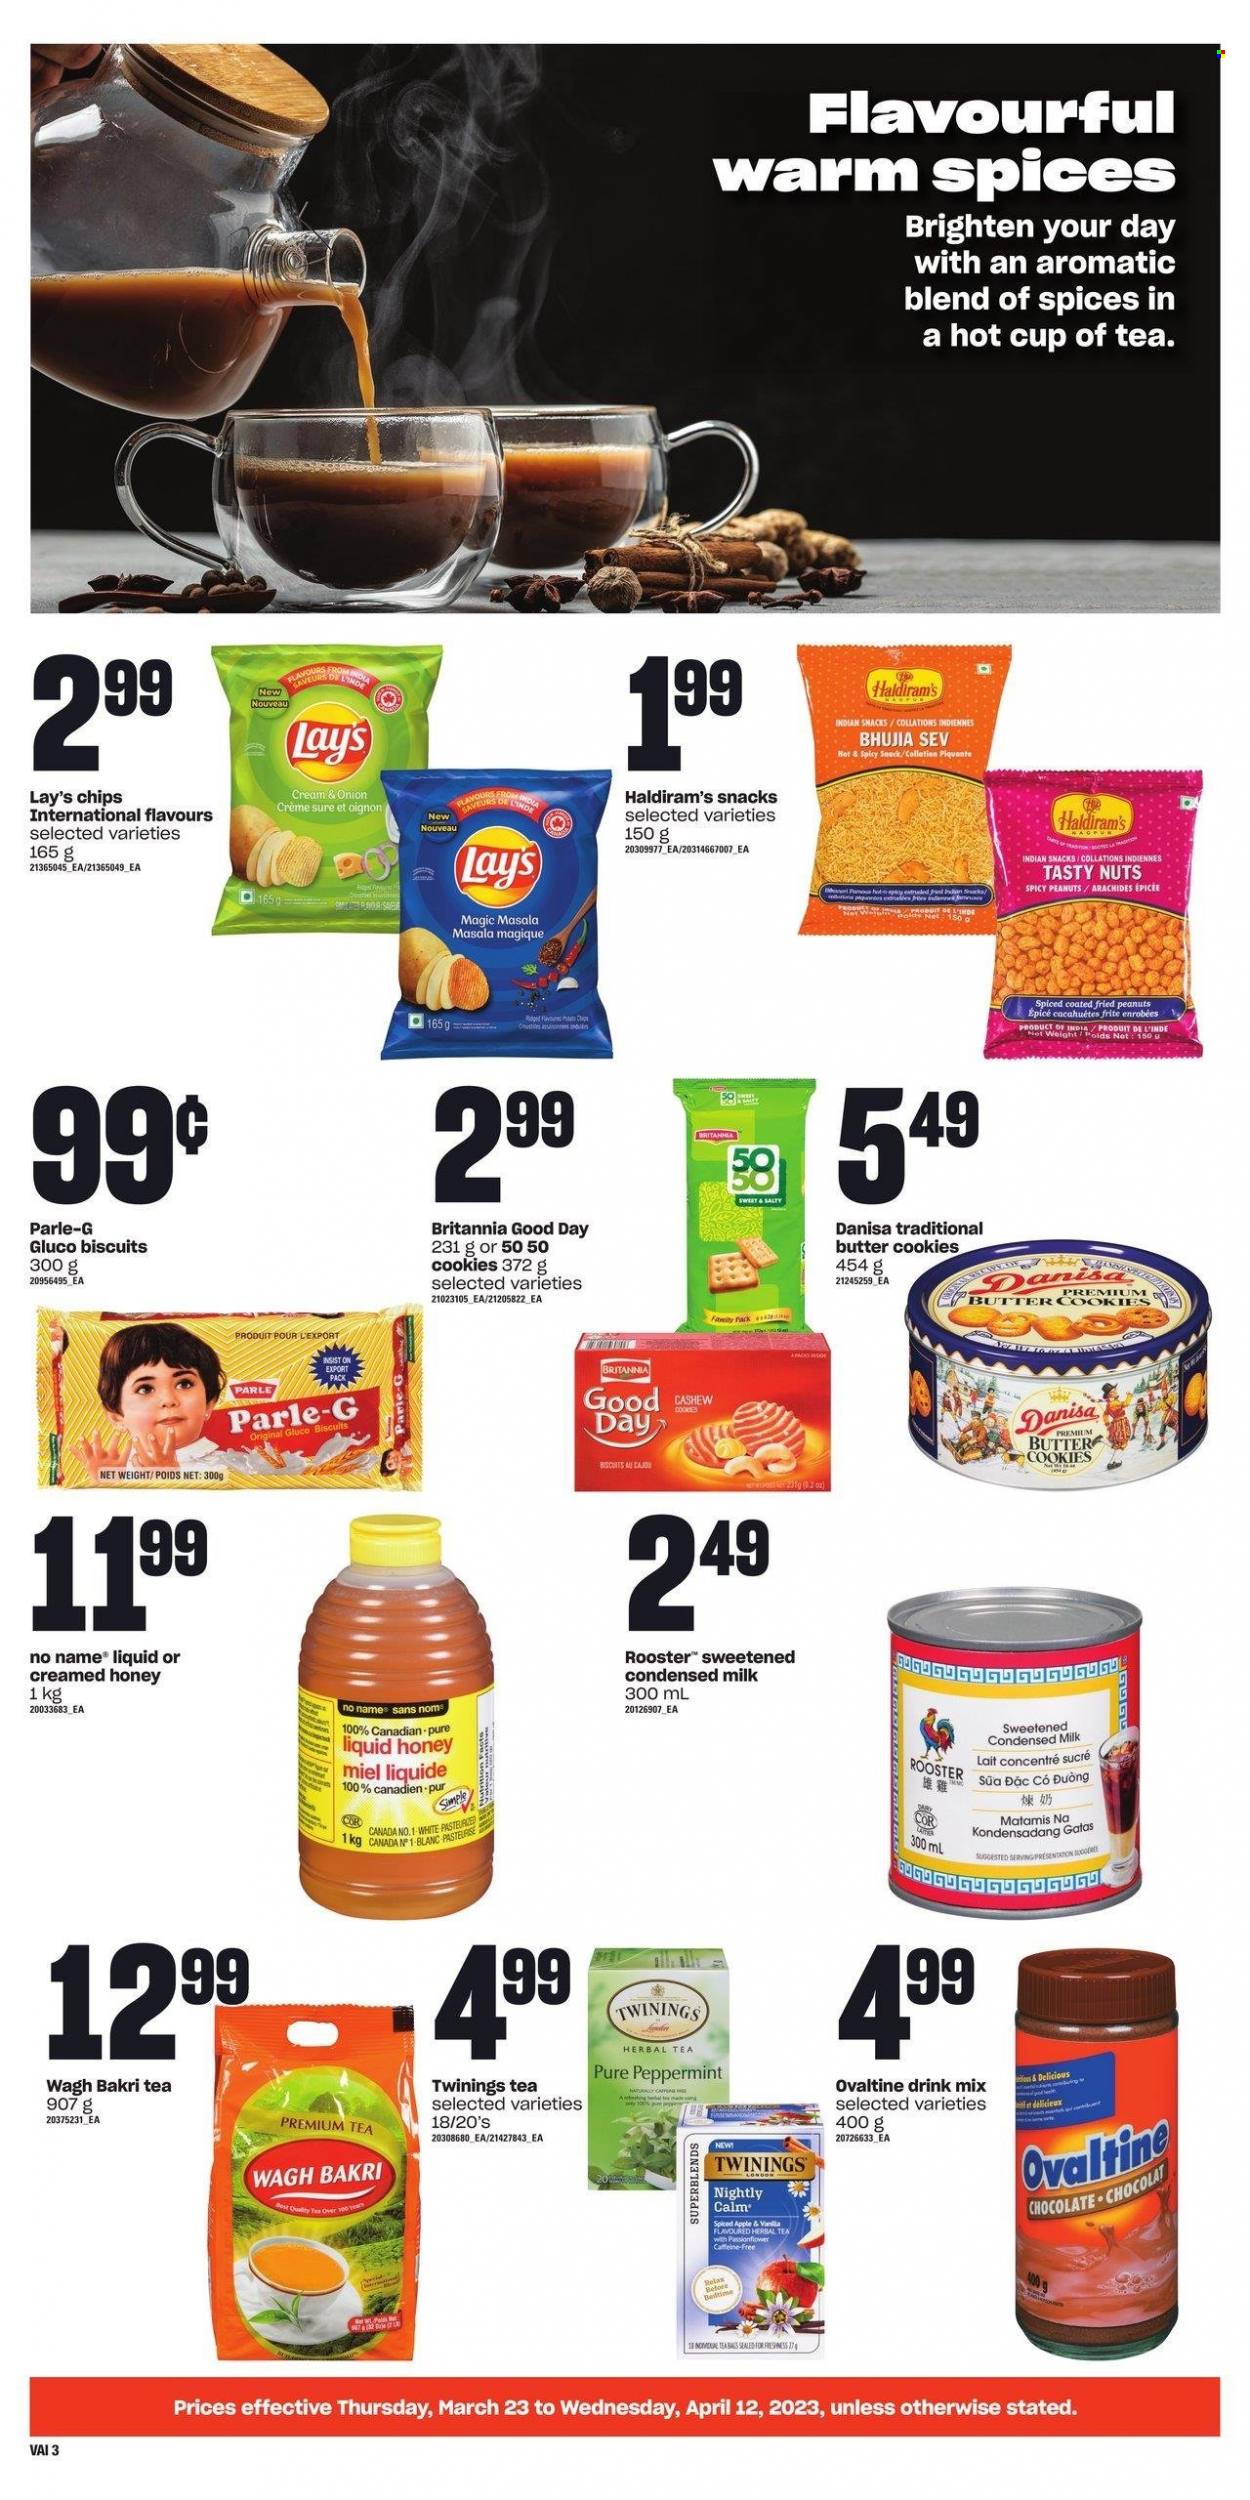 thumbnail - Atlantic Superstore Flyer - March 23, 2023 - April 12, 2023 - Sales products - No Name, condensed milk, cookies, chocolate, butter cookies, snack, biscuit, Parle, chips, Lay’s, bhujia, honey, peanuts, tea, herbal tea, Twinings, DAC, Sure. Page 3.